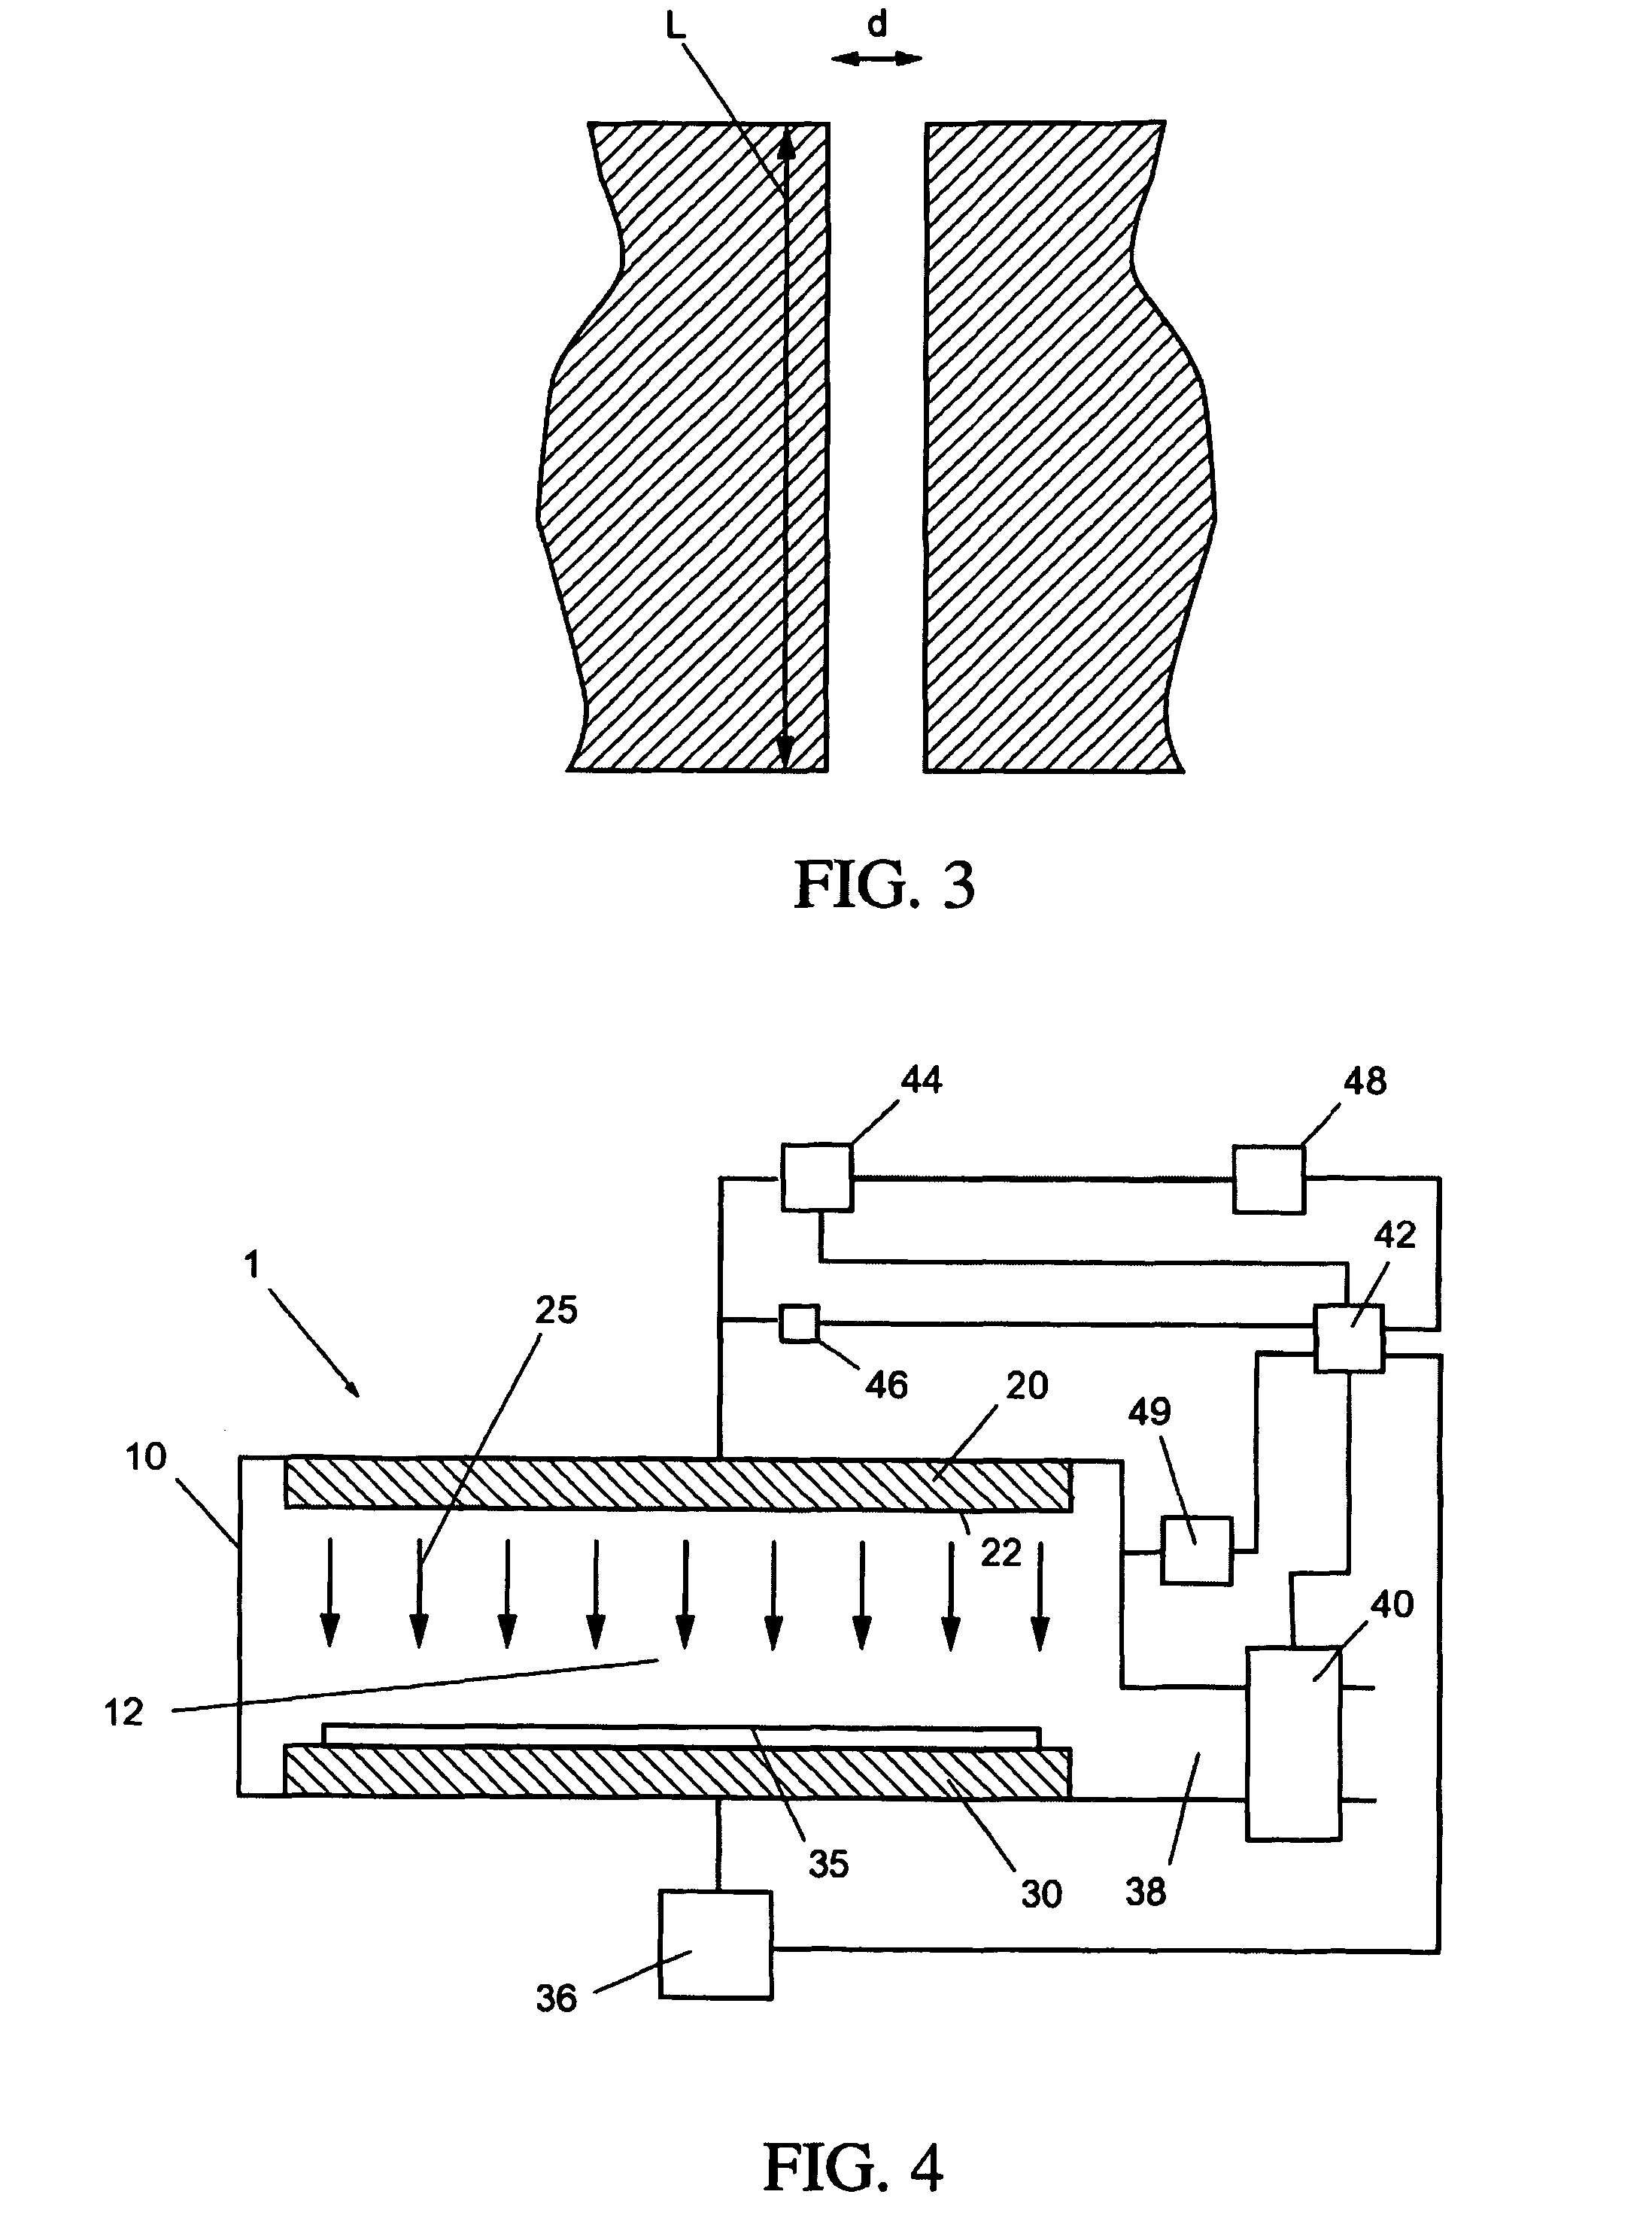 Directed gas injection apparatus for semiconductor processing